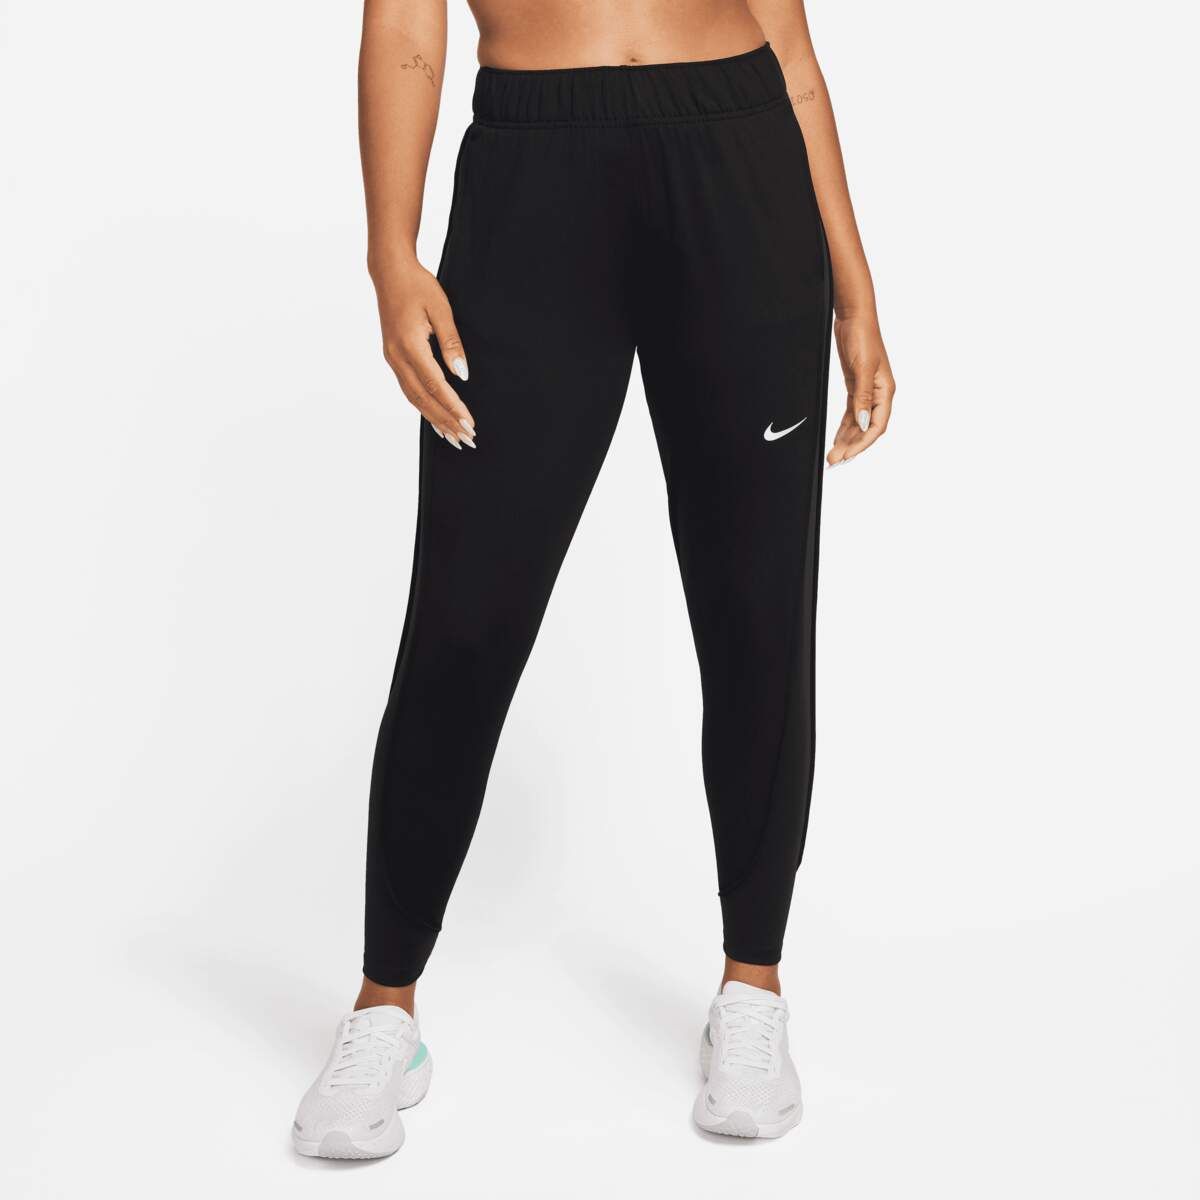 Nike-Therma-FIT-Essential-tights-black